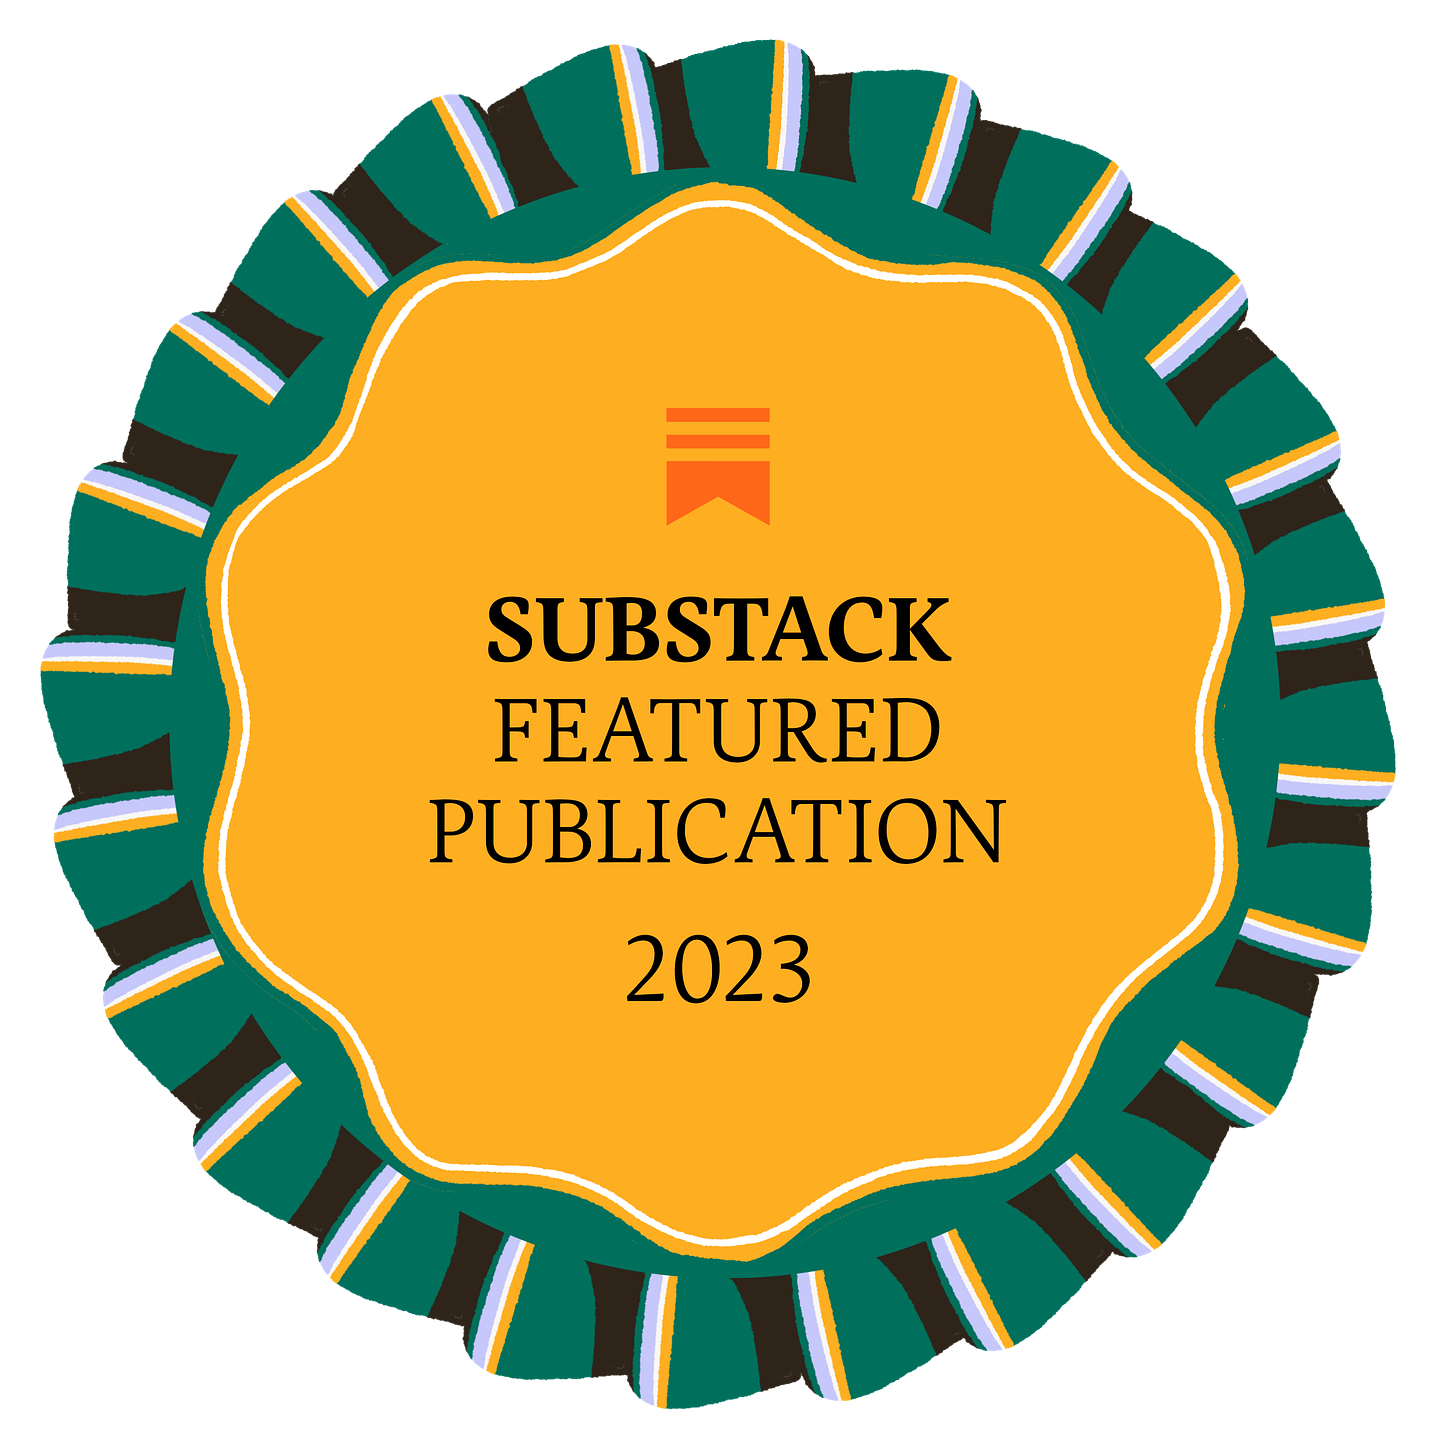 Gold badge - Atypical Kids, Mindful Parents was recommended by Substack!